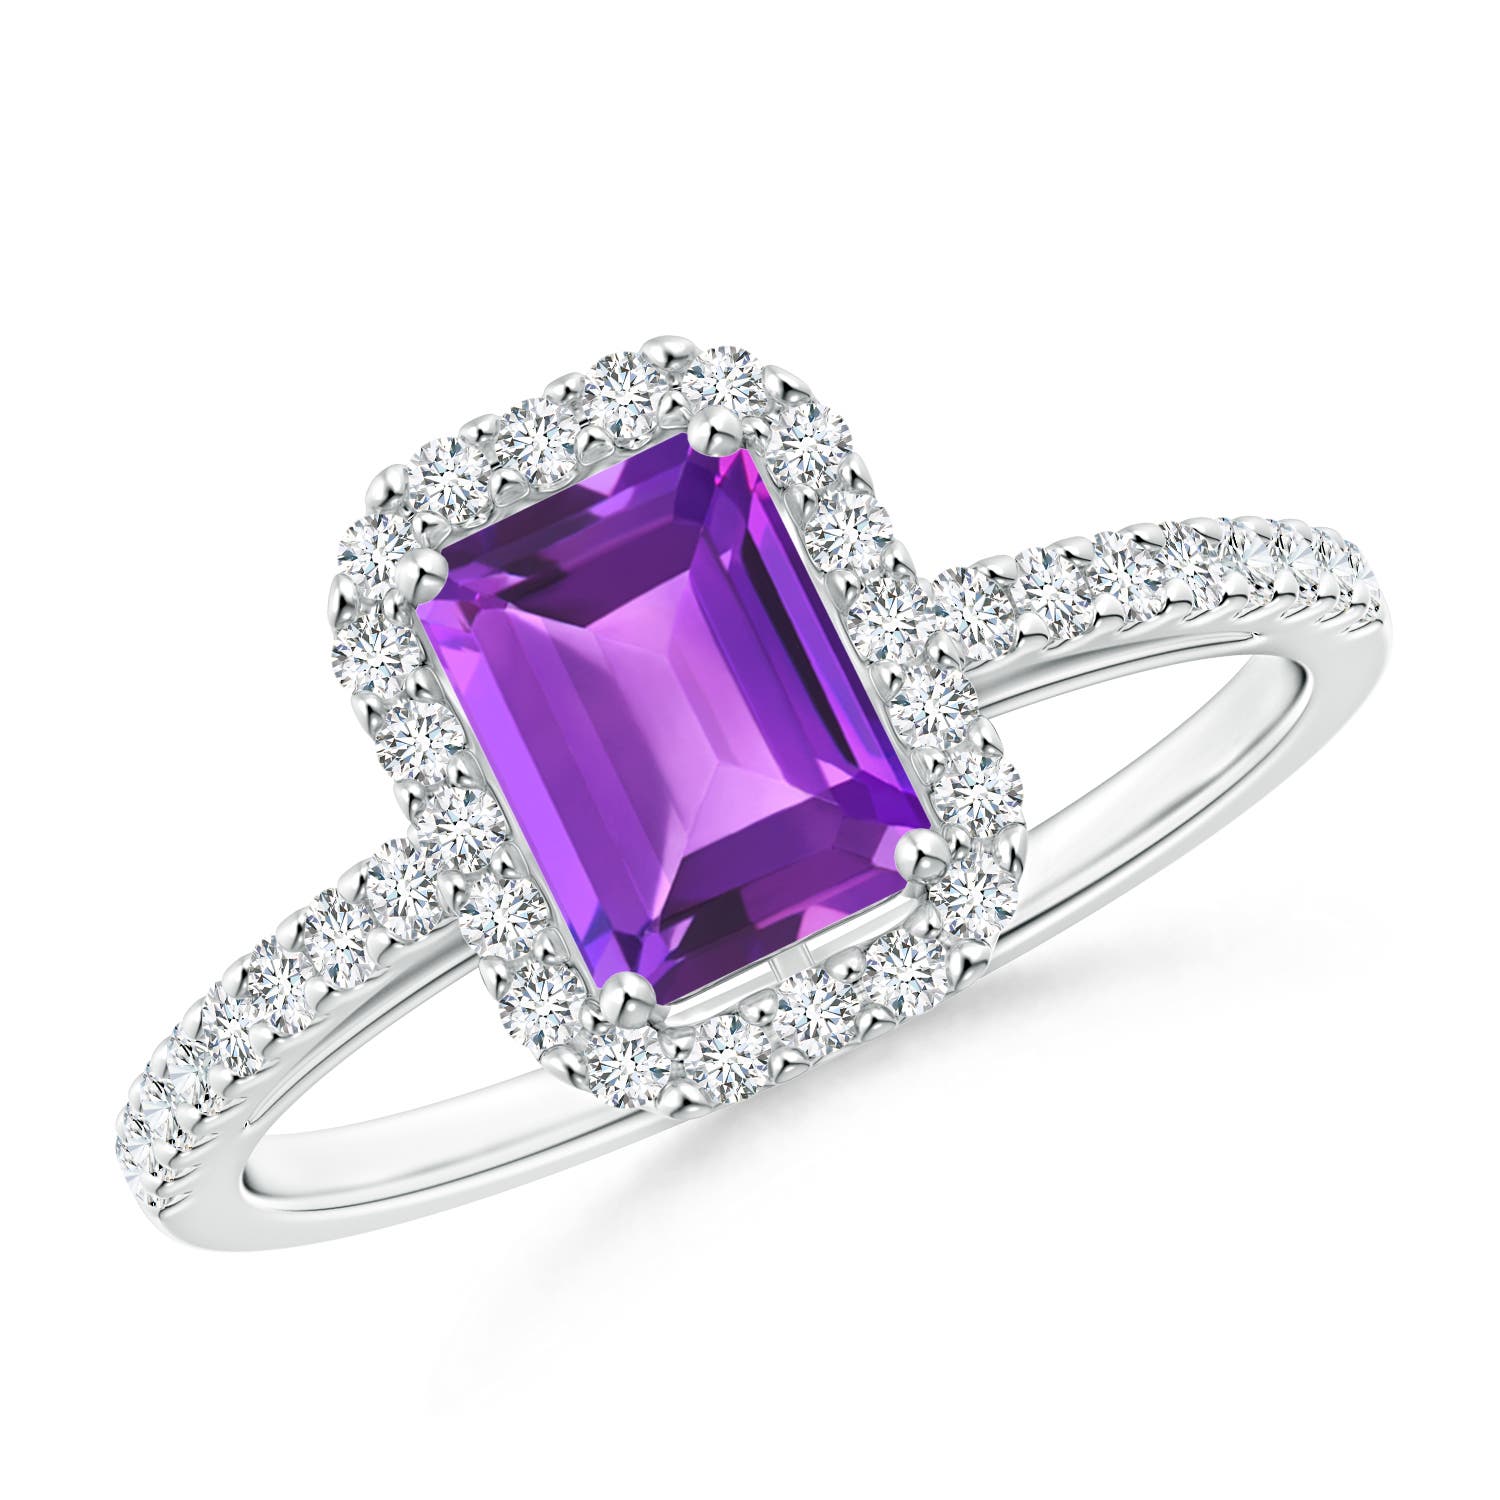 AAA - Amethyst / 1.23 CT / 14 KT White Gold